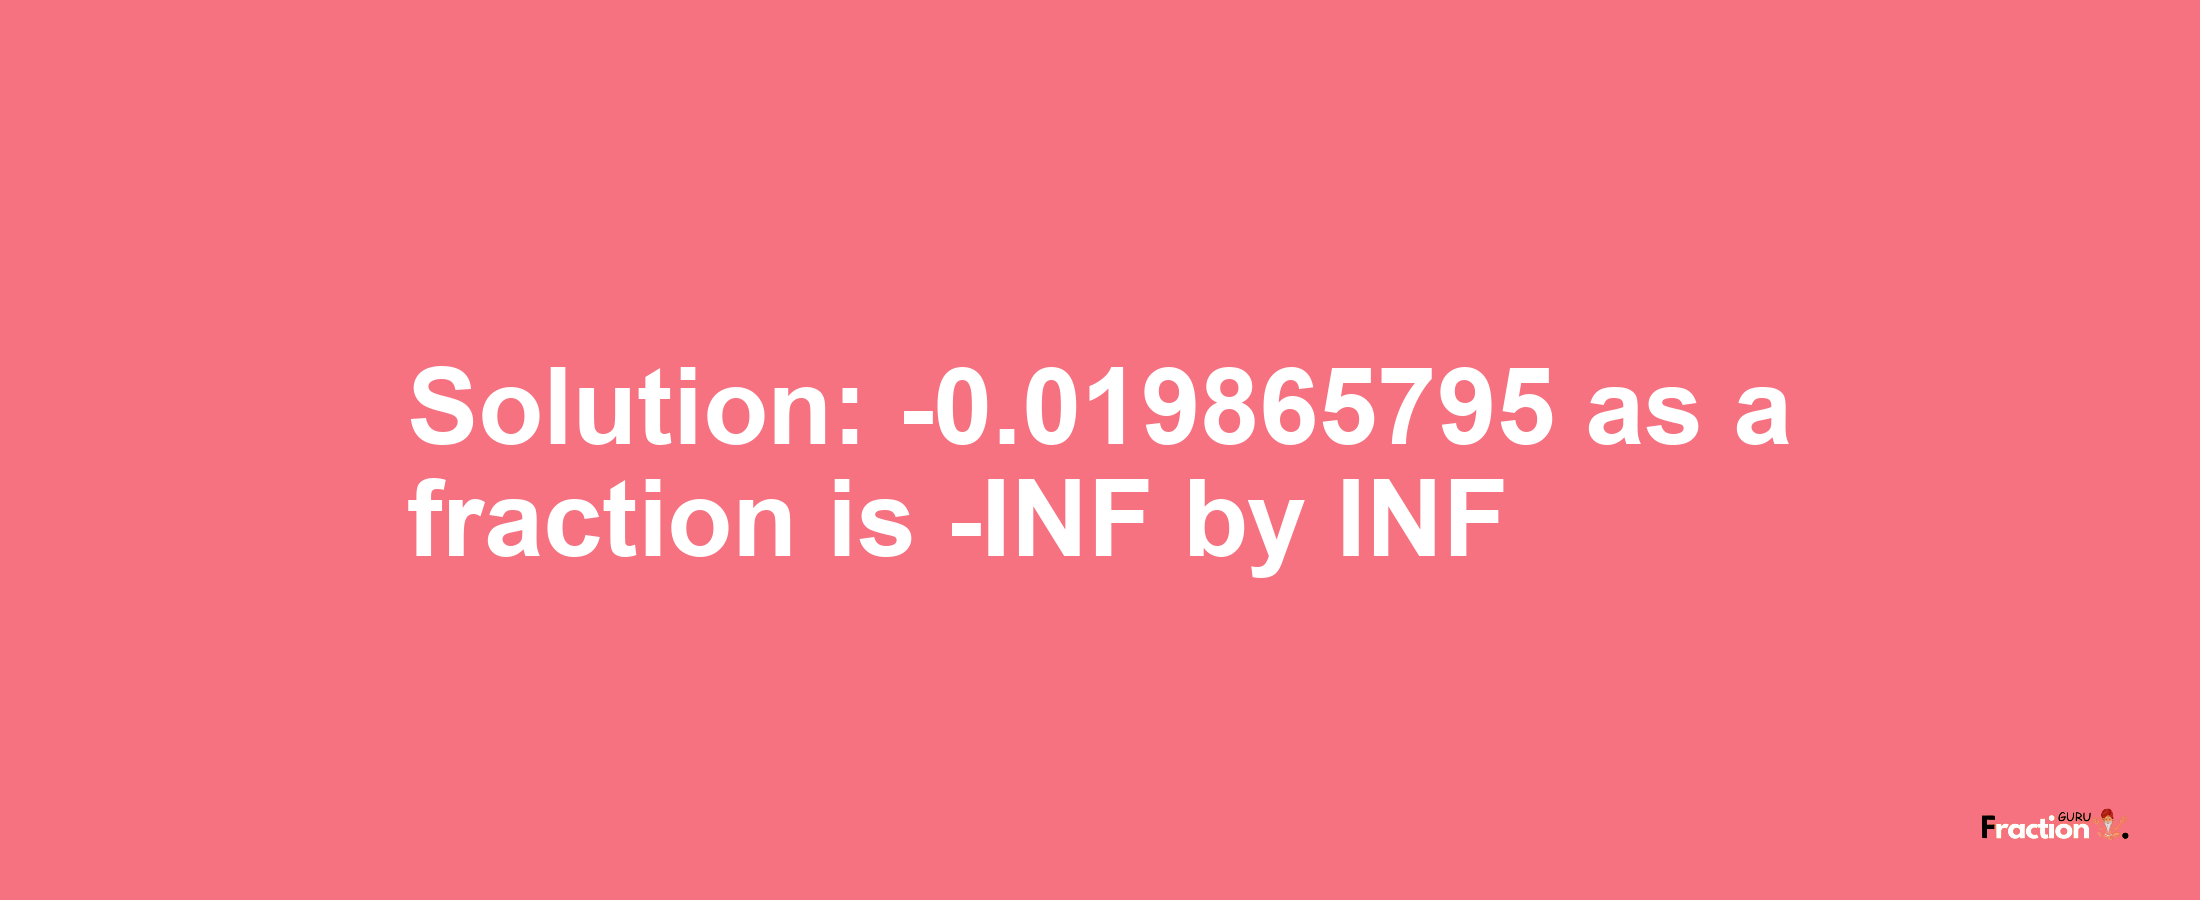 Solution:-0.019865795 as a fraction is -INF/INF